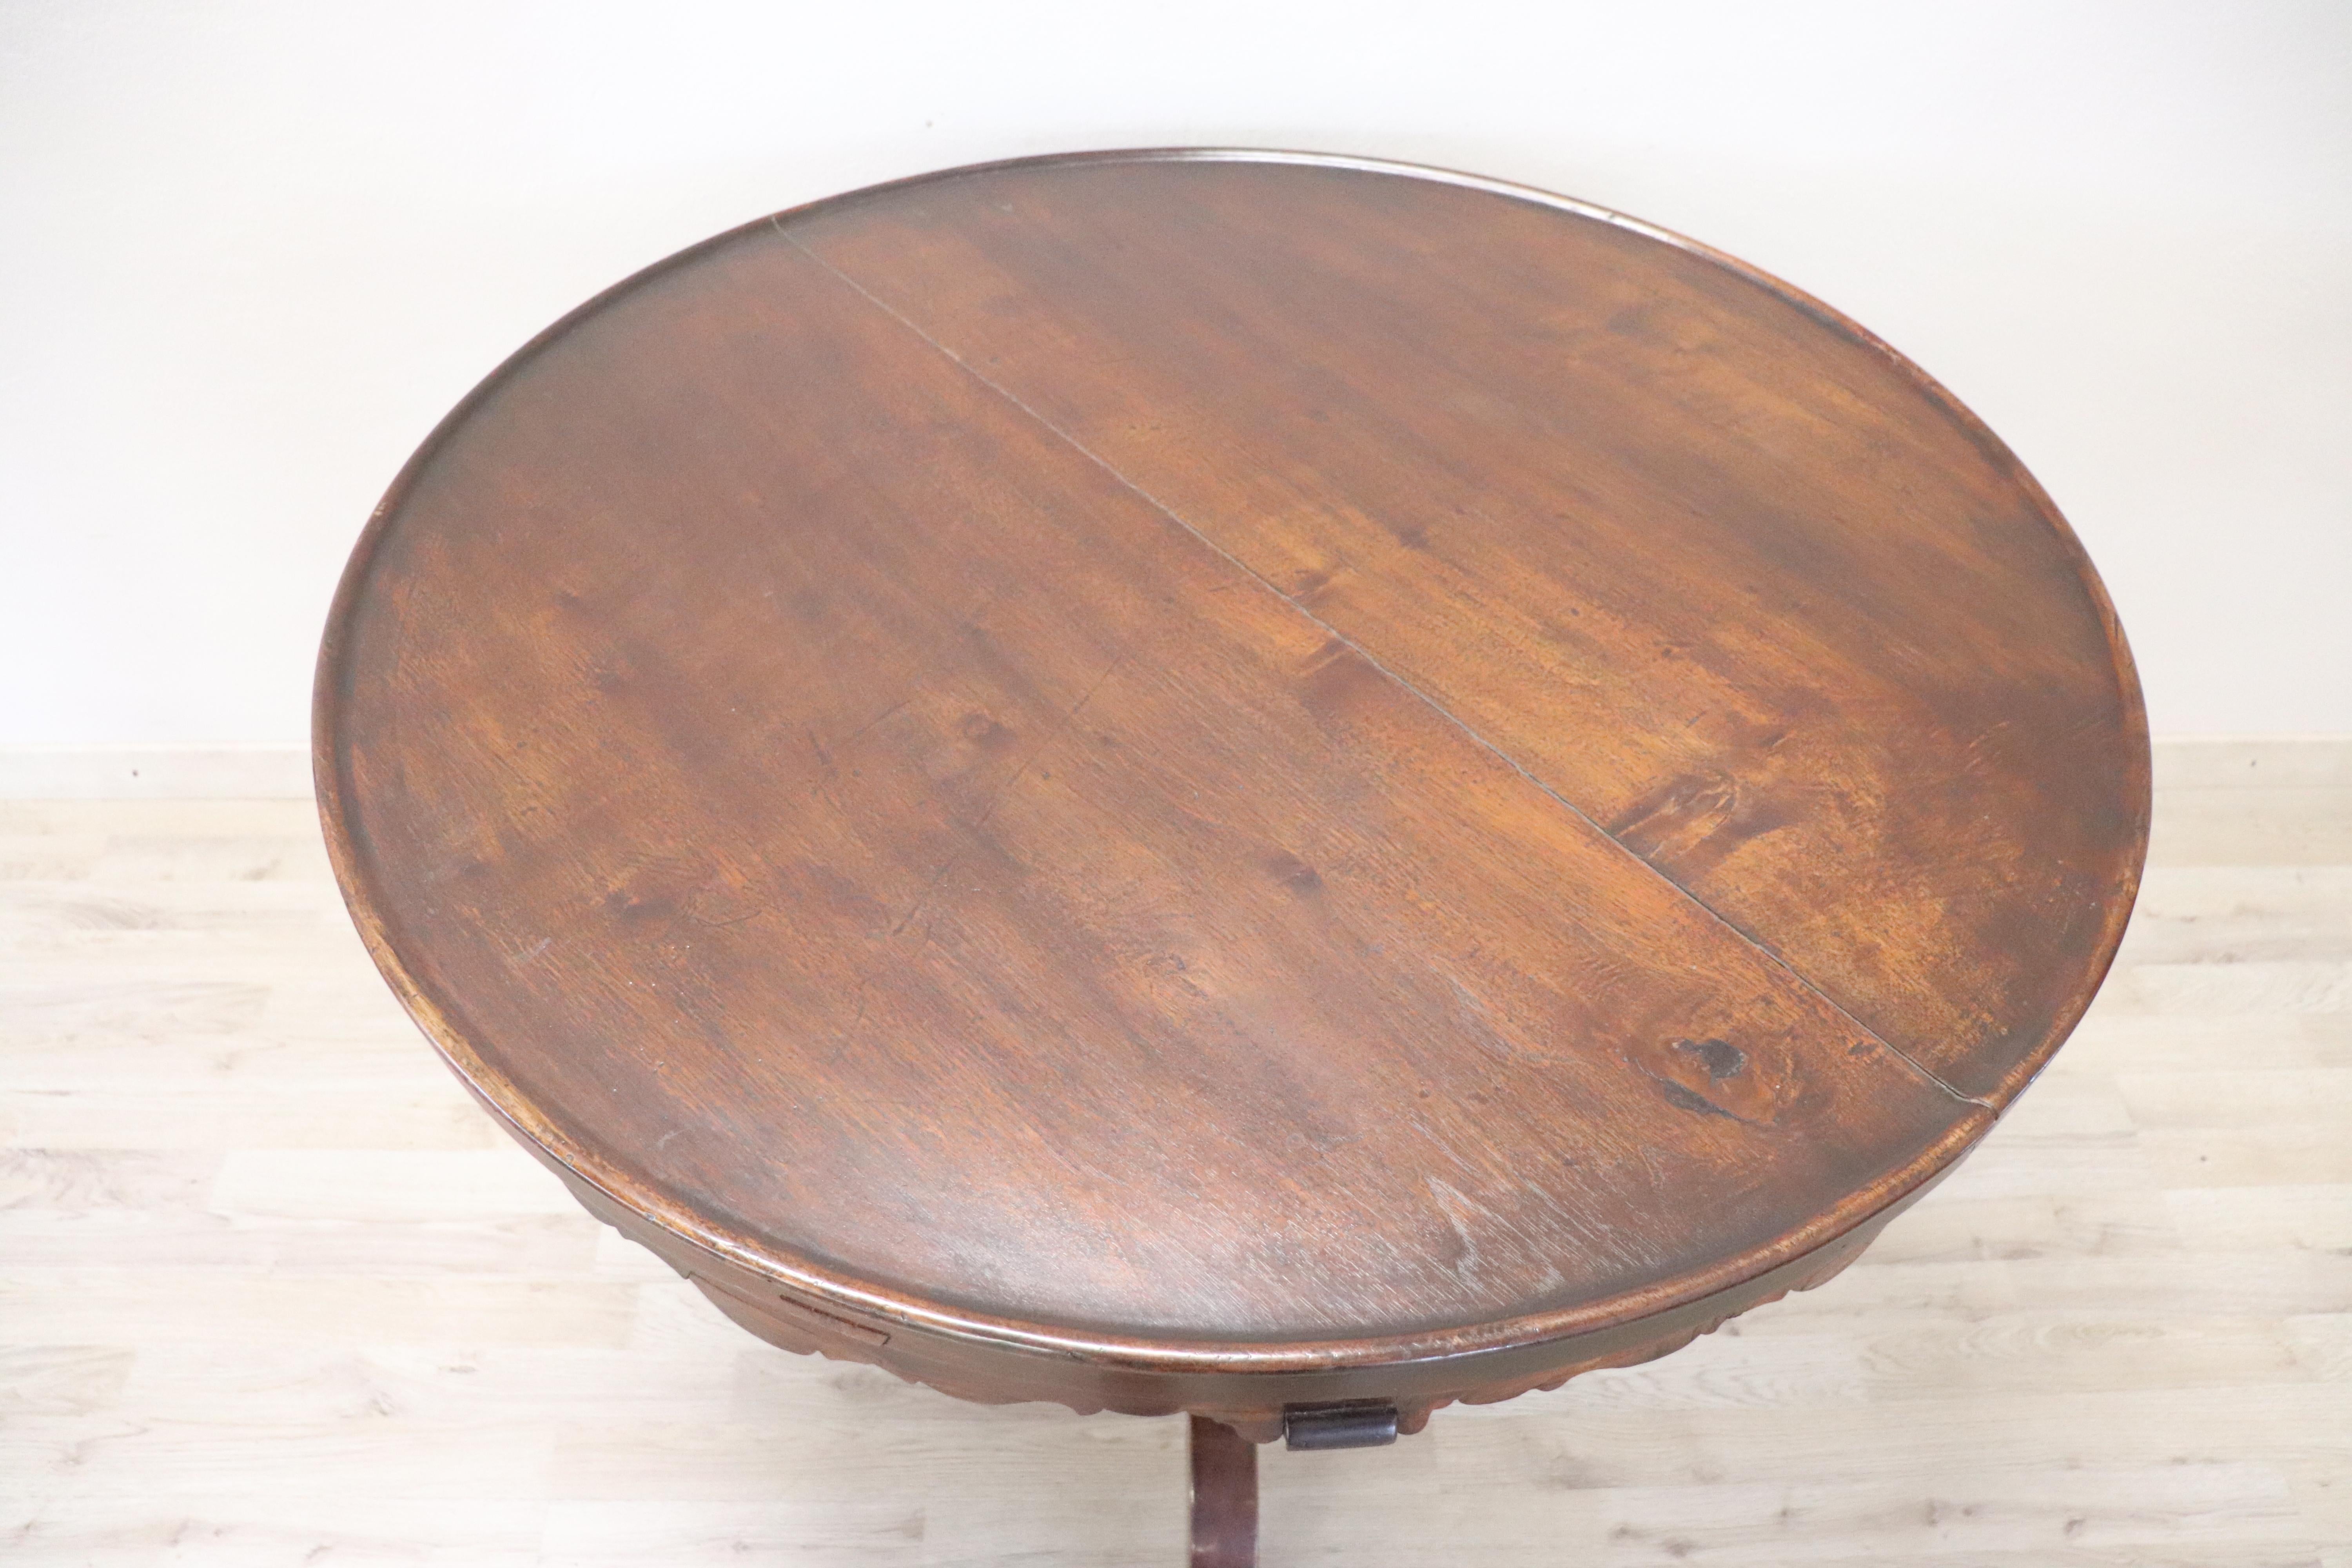 Beautiful important antique round center table 1845 in walnut. Table with elegant turned central leg. The table band presents elegant decoration move. The tabletop where the edge is made from walnut is of great value. Ideal table to embellish the